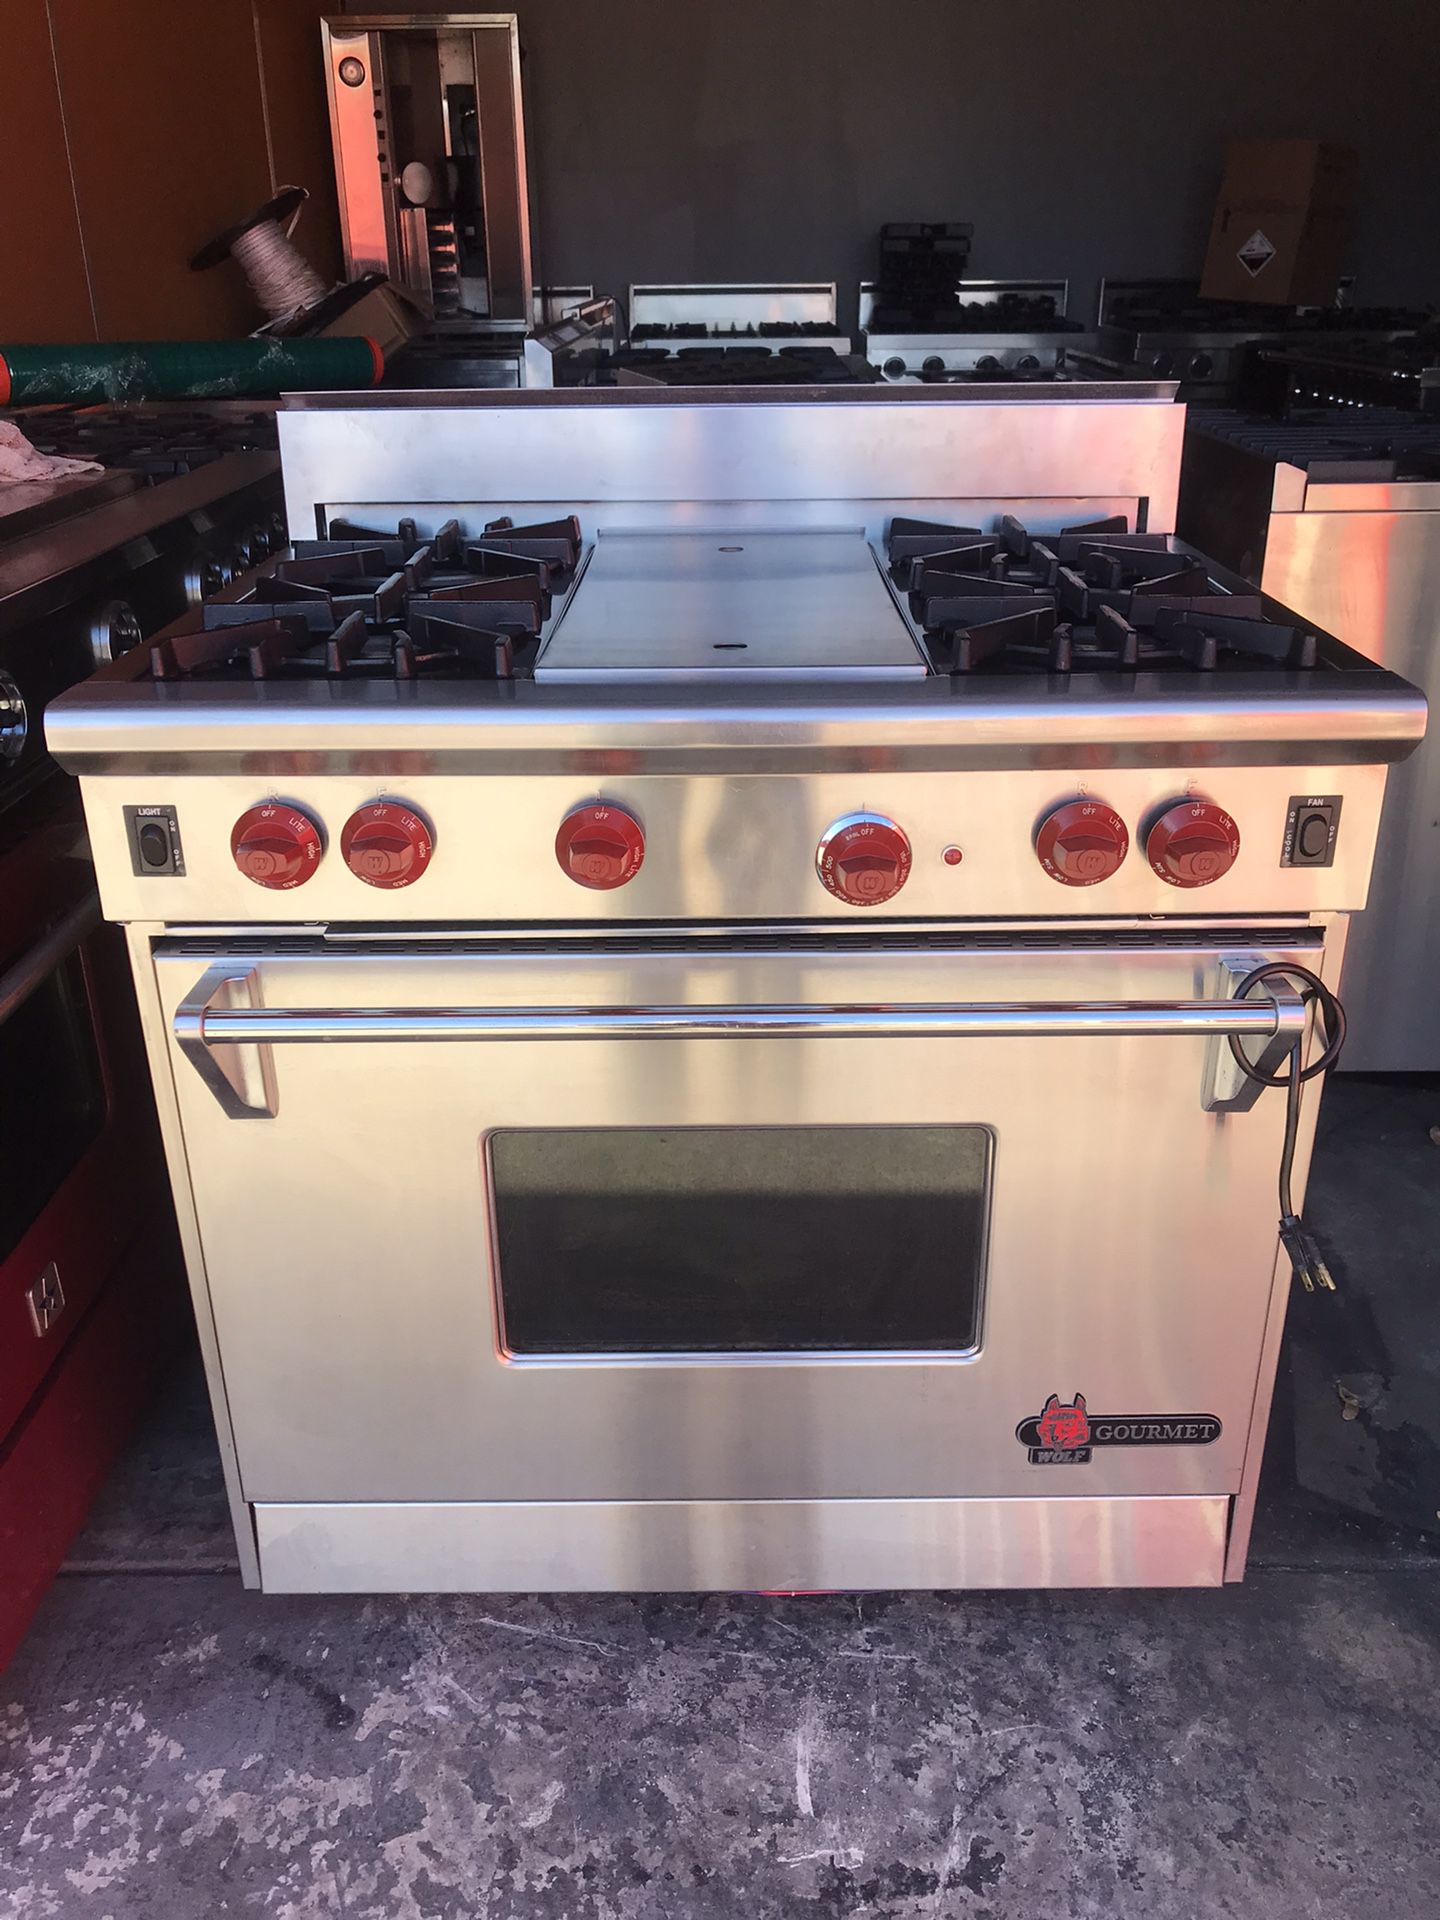 VIKING STOVE PROFESSIONAL 36 GAS PROPANE for Sale in Hayward, CA - OfferUp